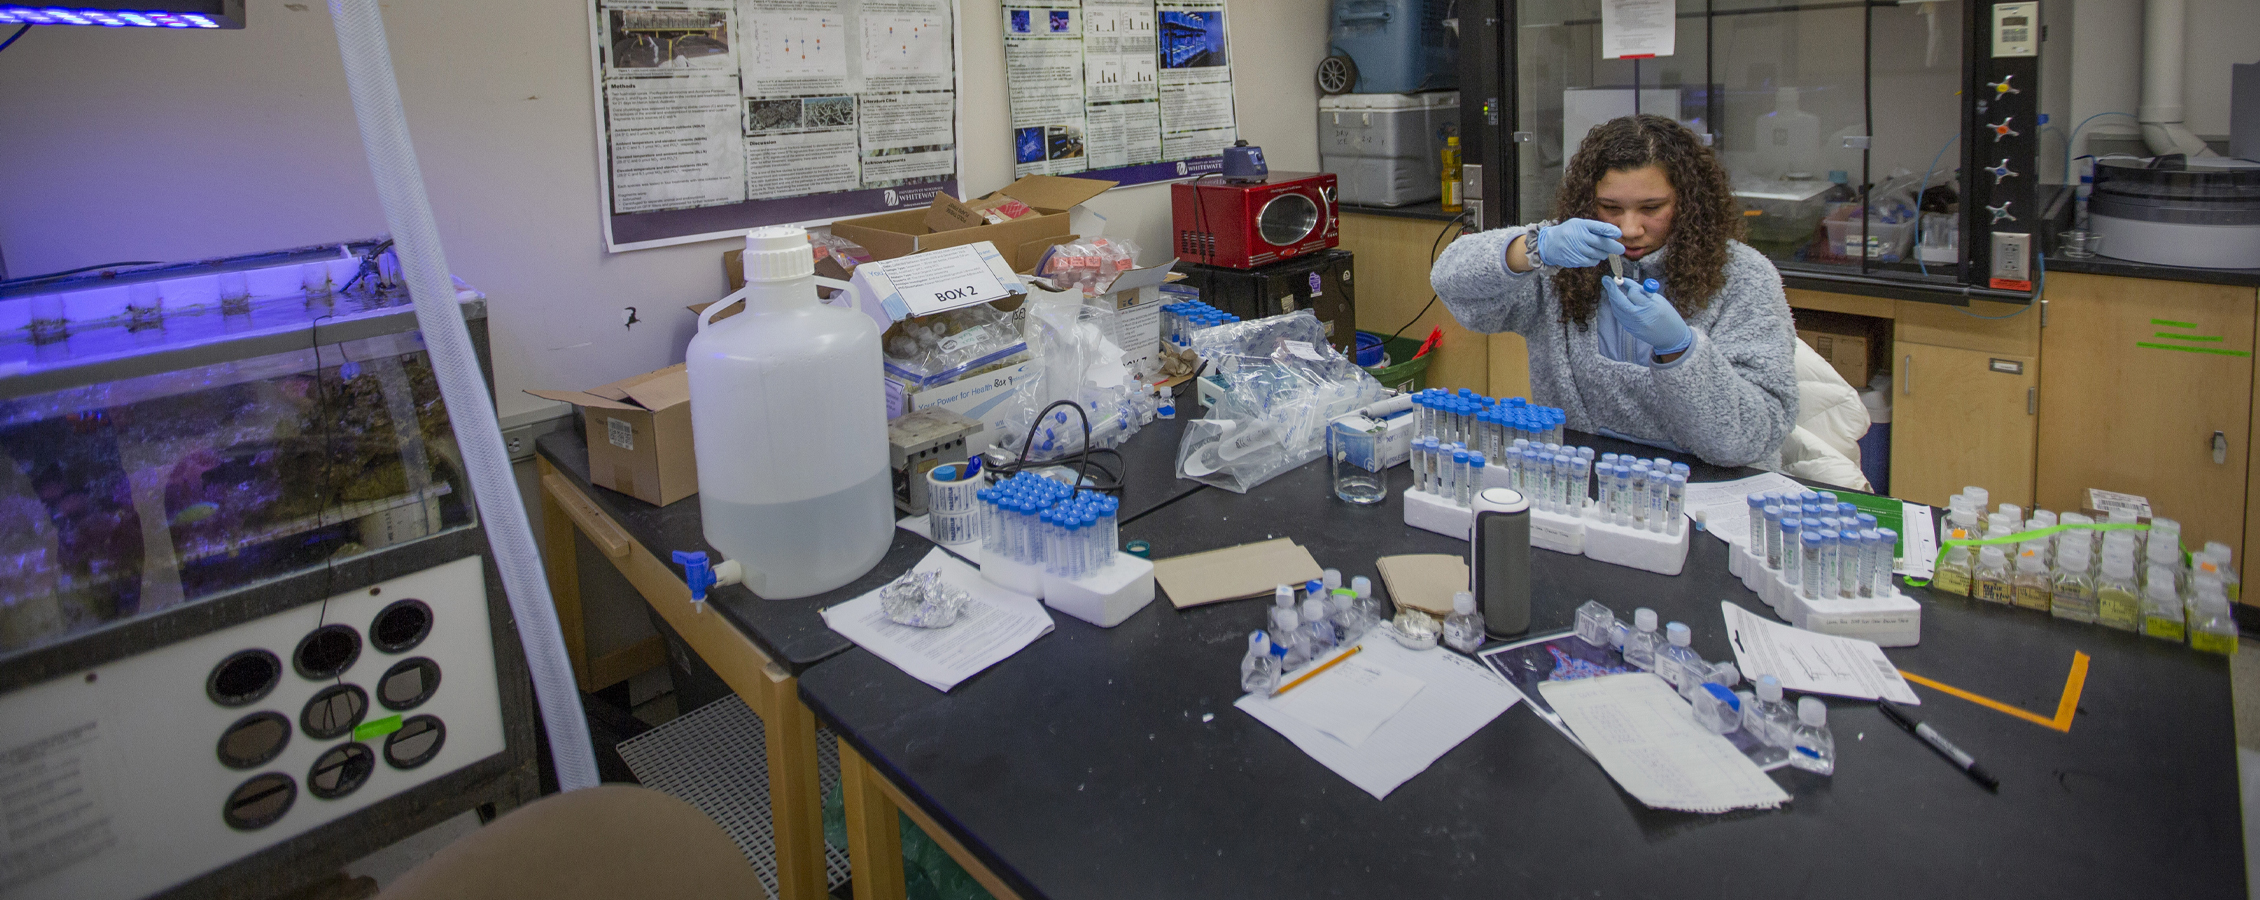 A student tests water samples in a lab.